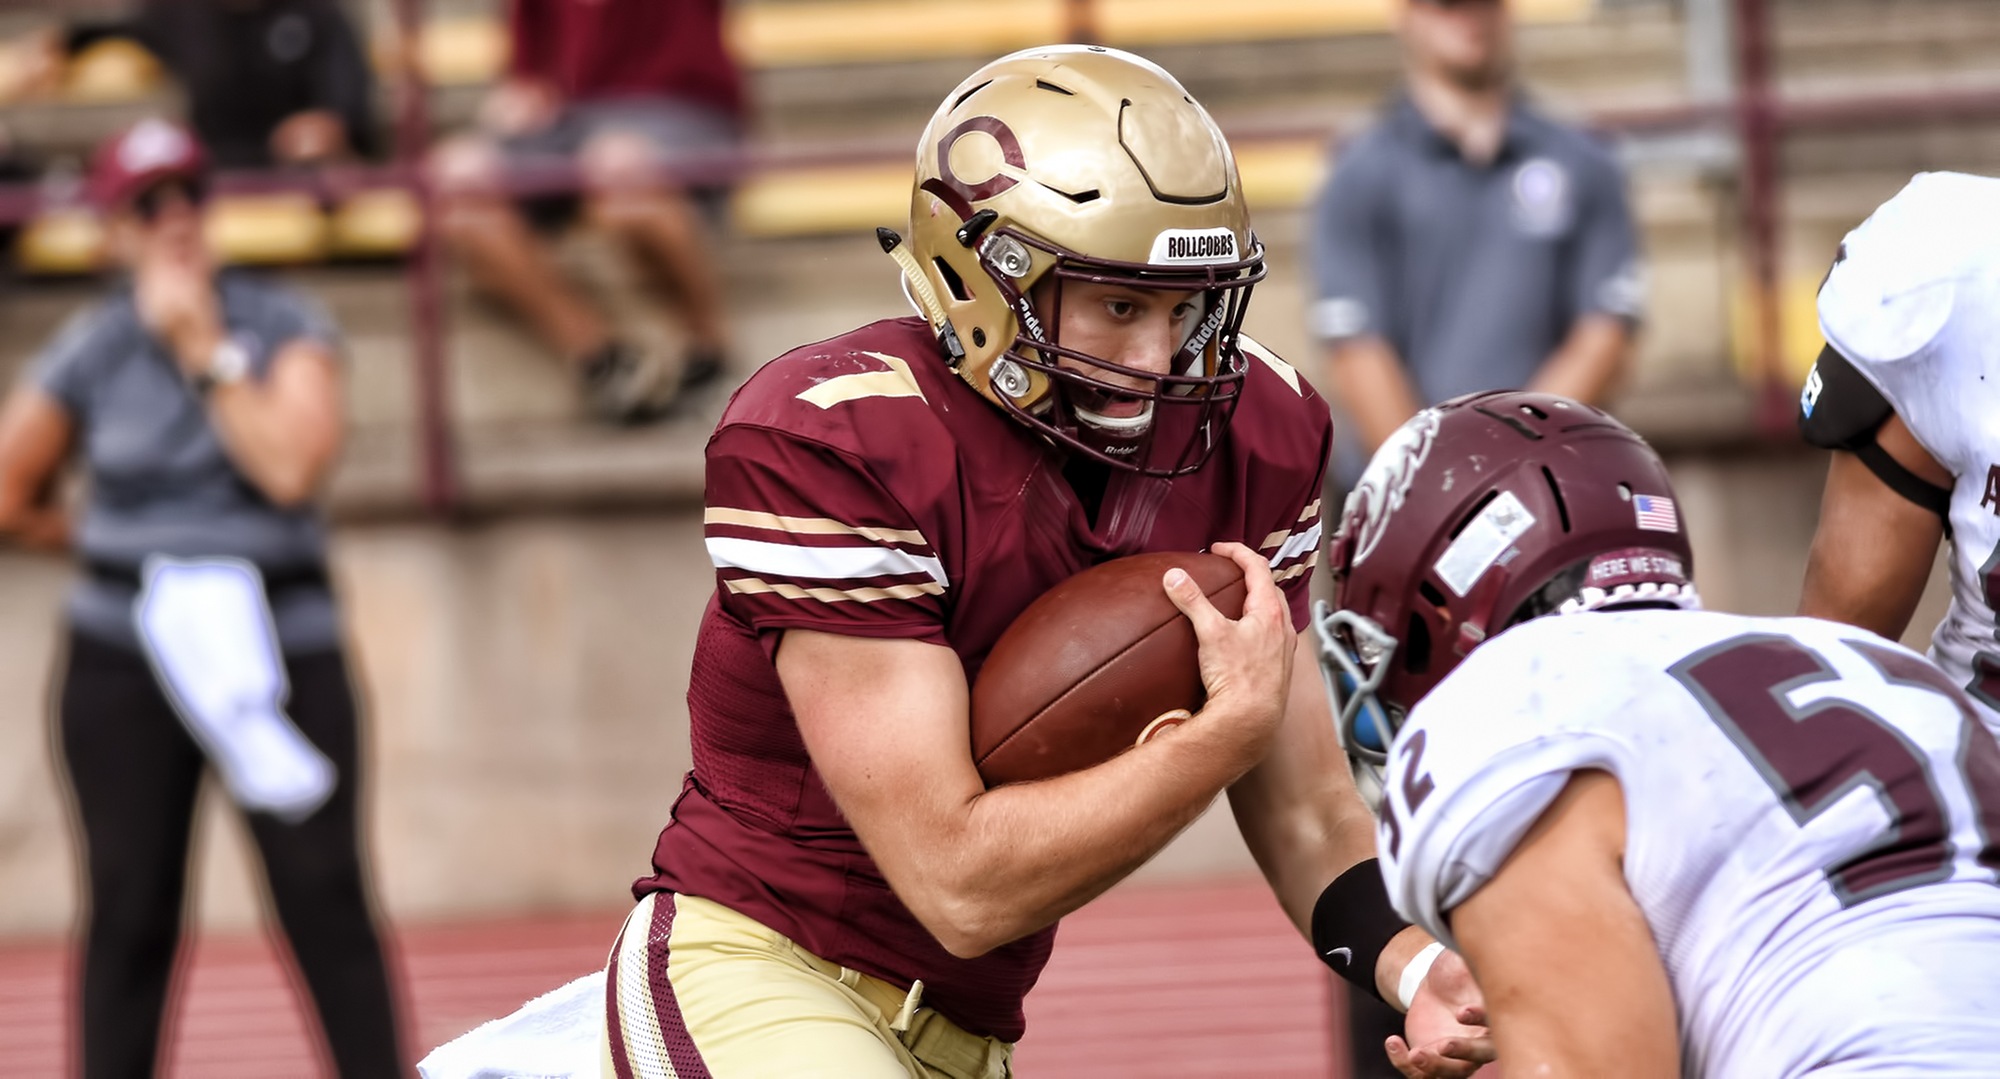 Junior Sean McGuire rushed for a career-high 173 yards and one TD and also threw for three other scores in the Cobbers' win at Carleton.